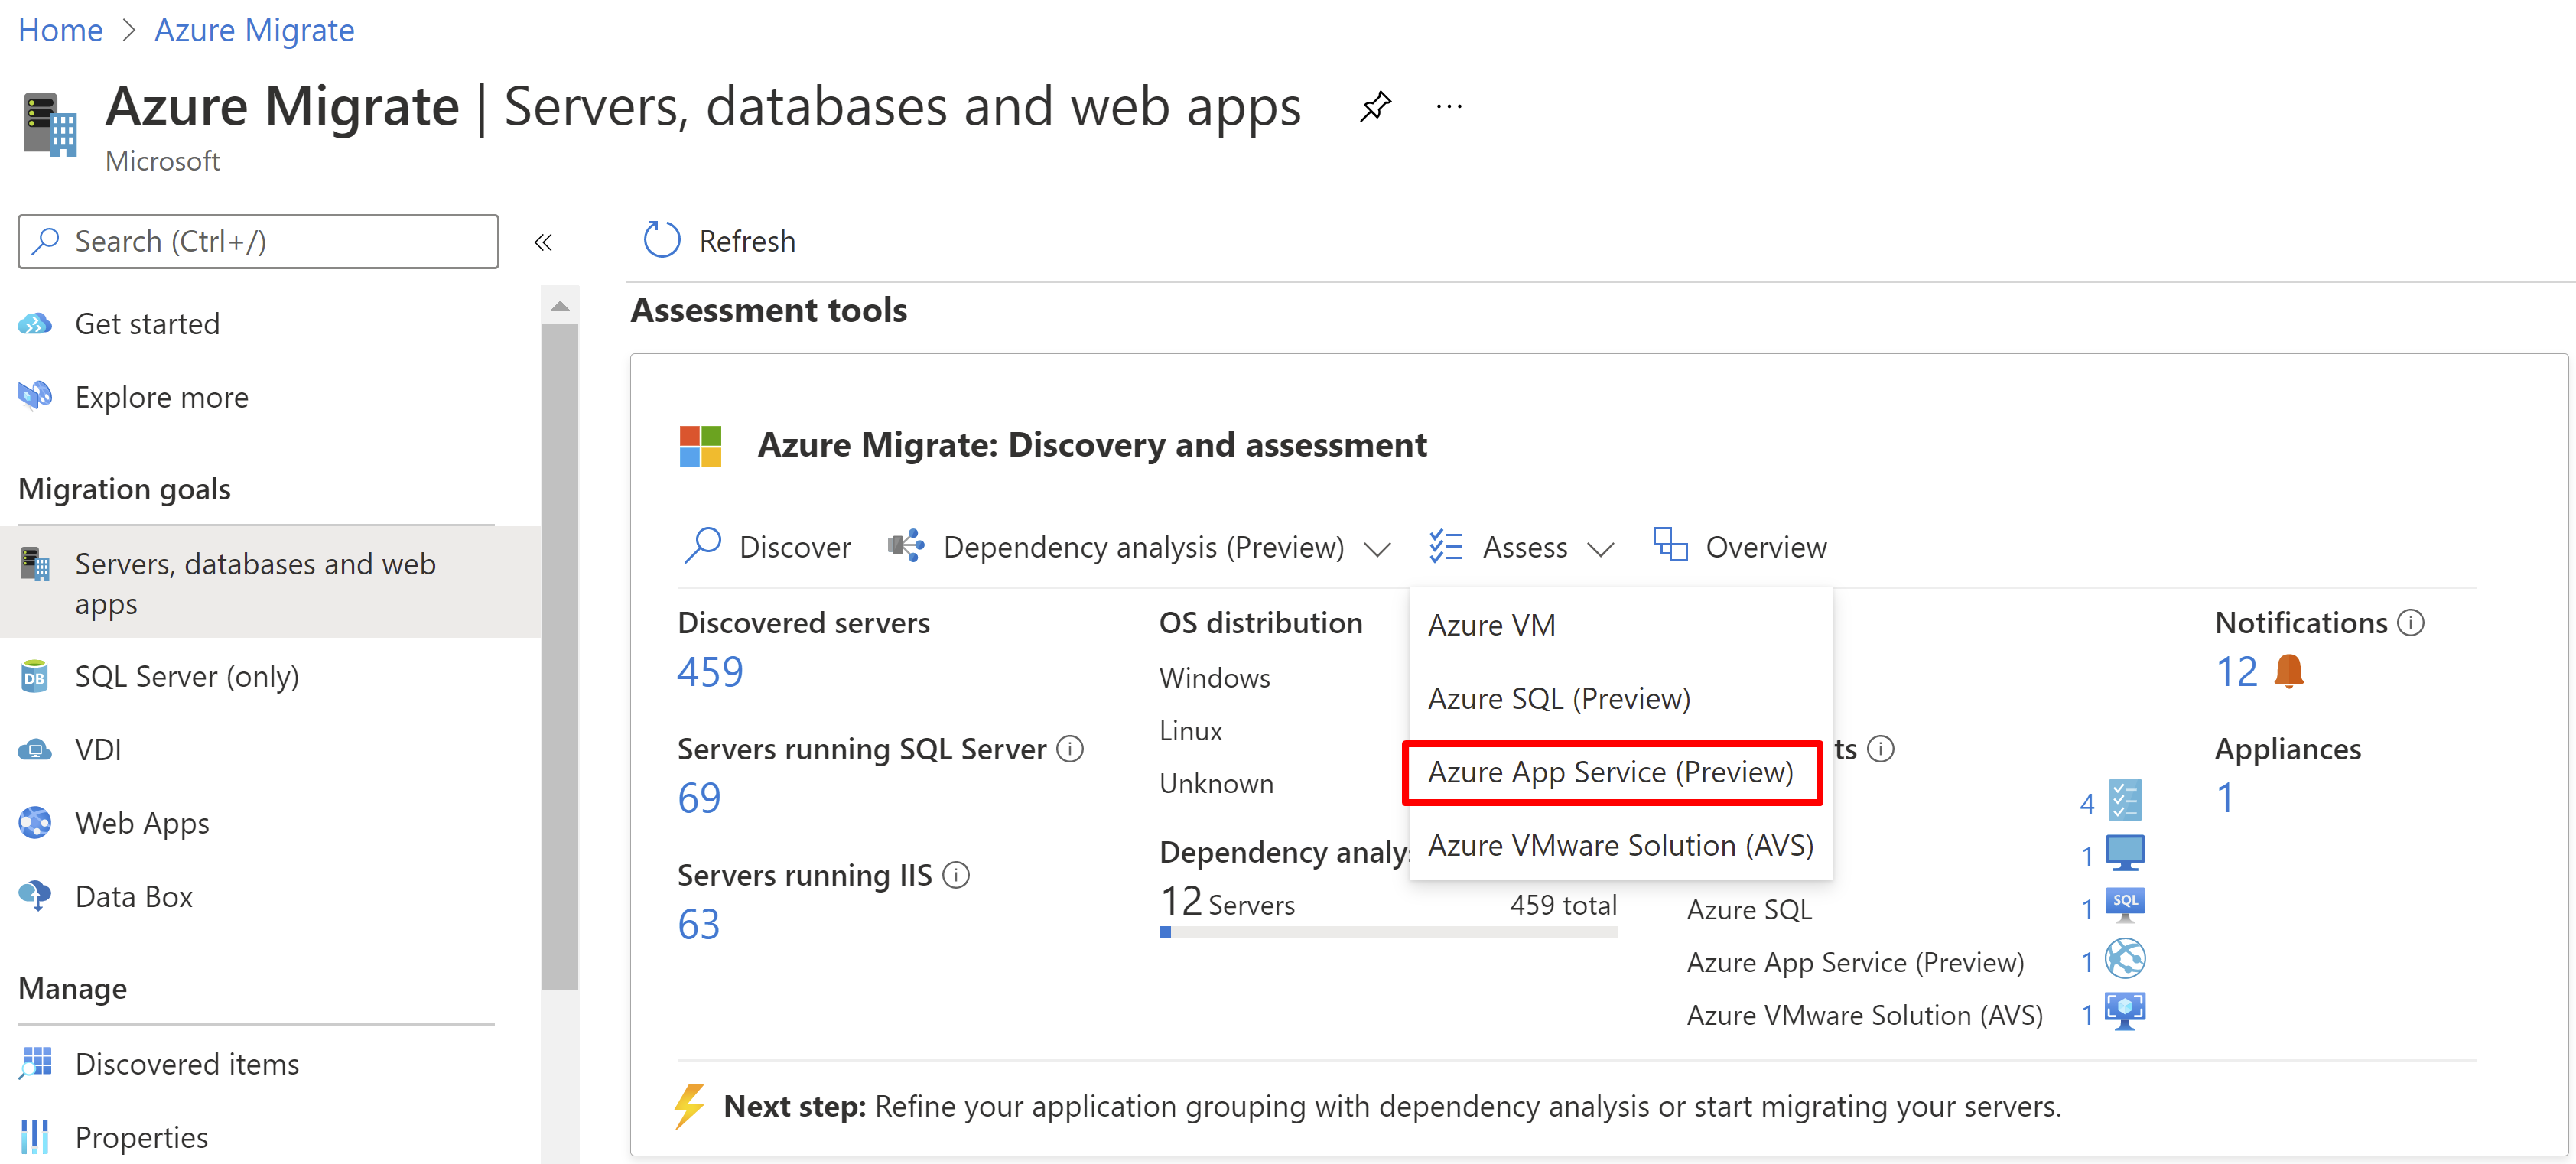 Dropdown to choose assessment type as Azure App Service